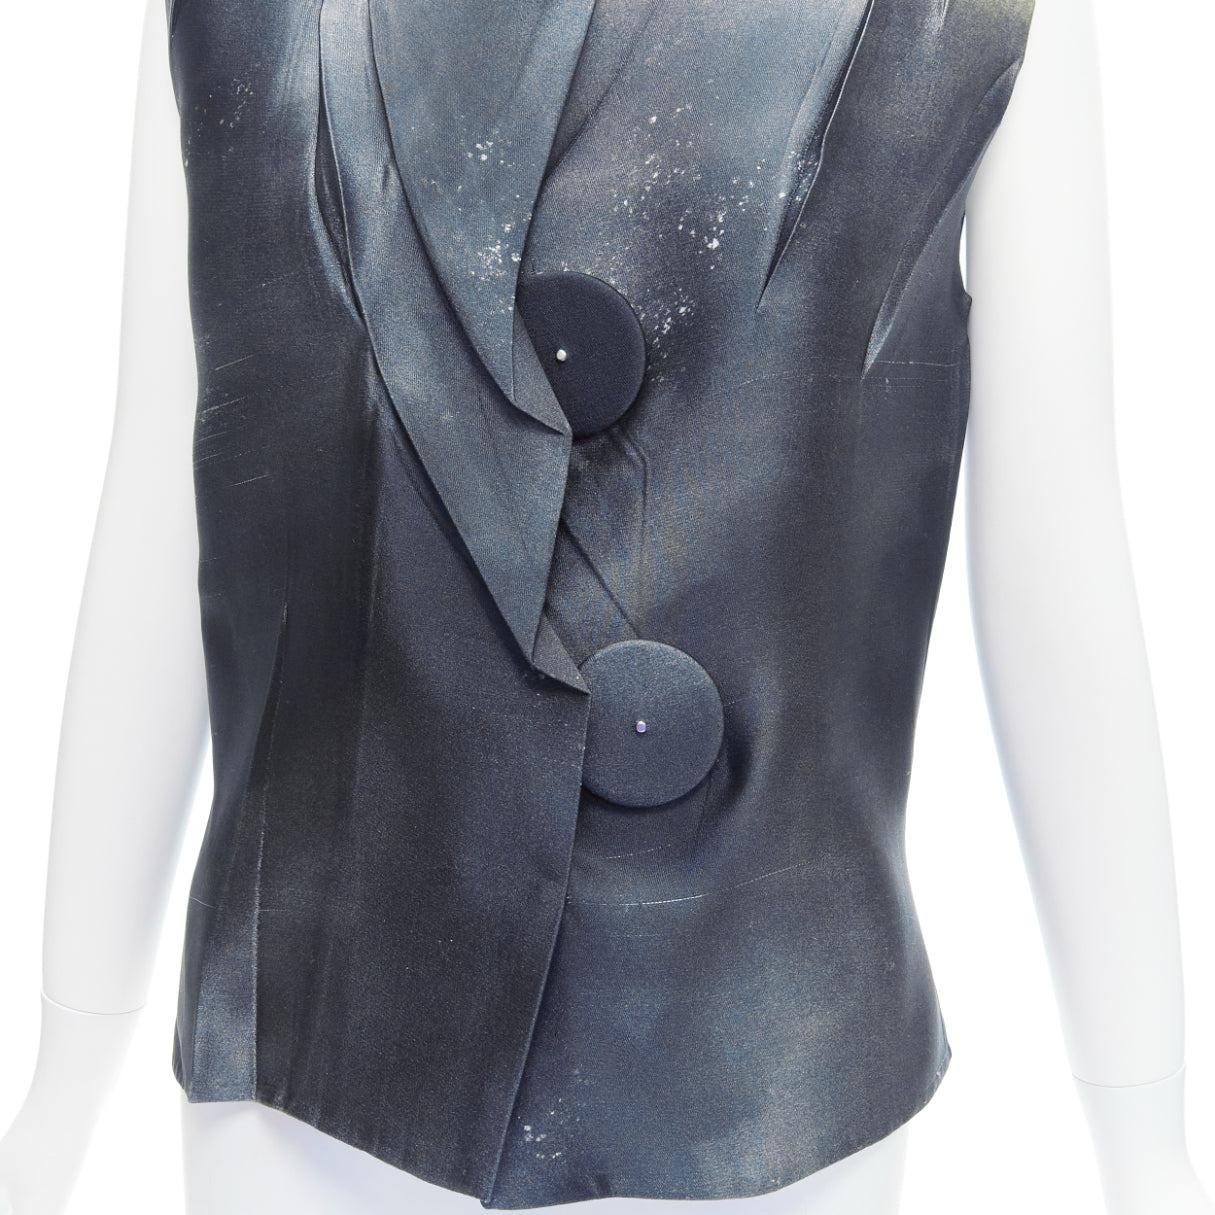 PRADA 2023 Runway silk blend grey water dyed crinkled XL button top IT36
Reference: NKLL/A00022
Brand: Prada
Designer: Miuccia Prada
Collection: 2023 - Runway
Material: Silk, Blend
Color: Grey, Cream
Pattern: Solid
Closure: Snap Buttons
Lining: